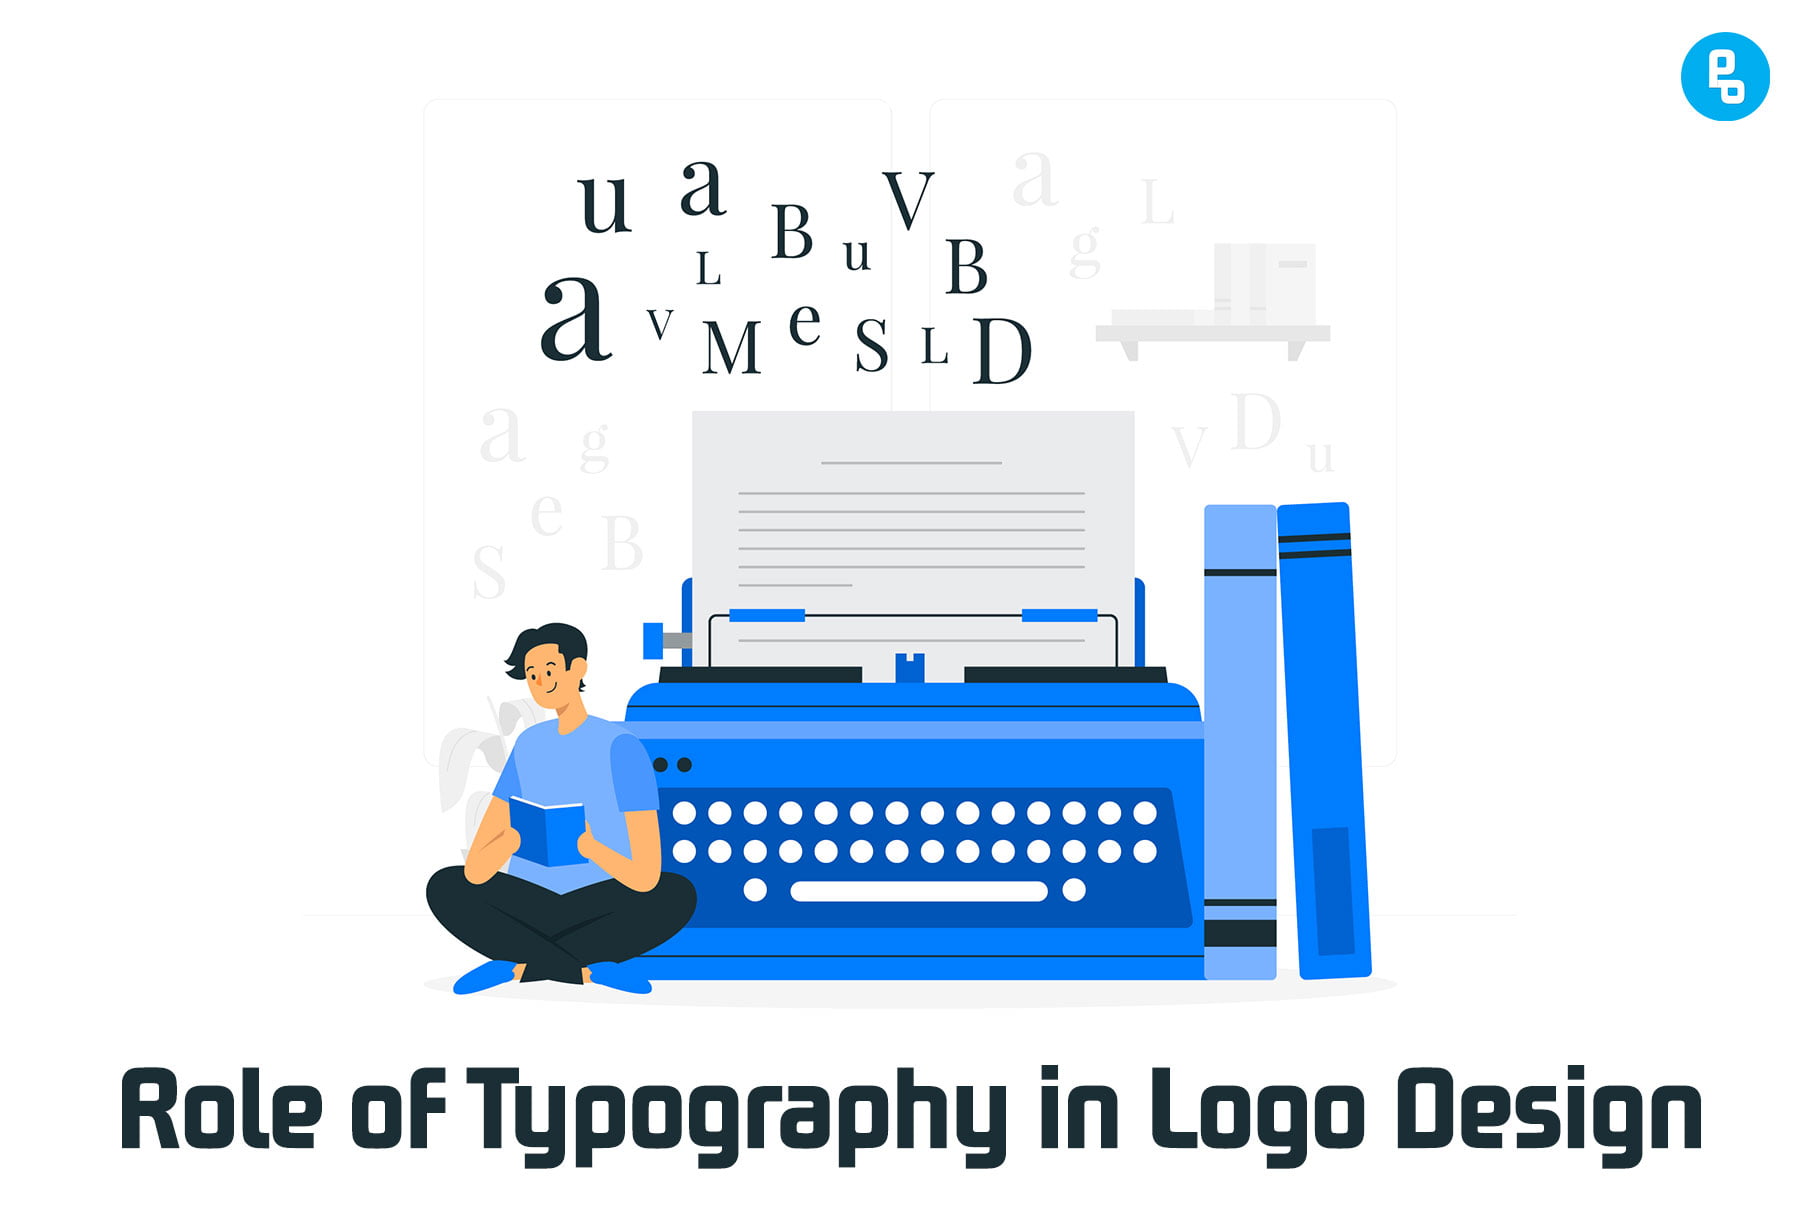 The aim of this article is to help you understand the role of typography in logo design and how to choose the right typeface for your project.